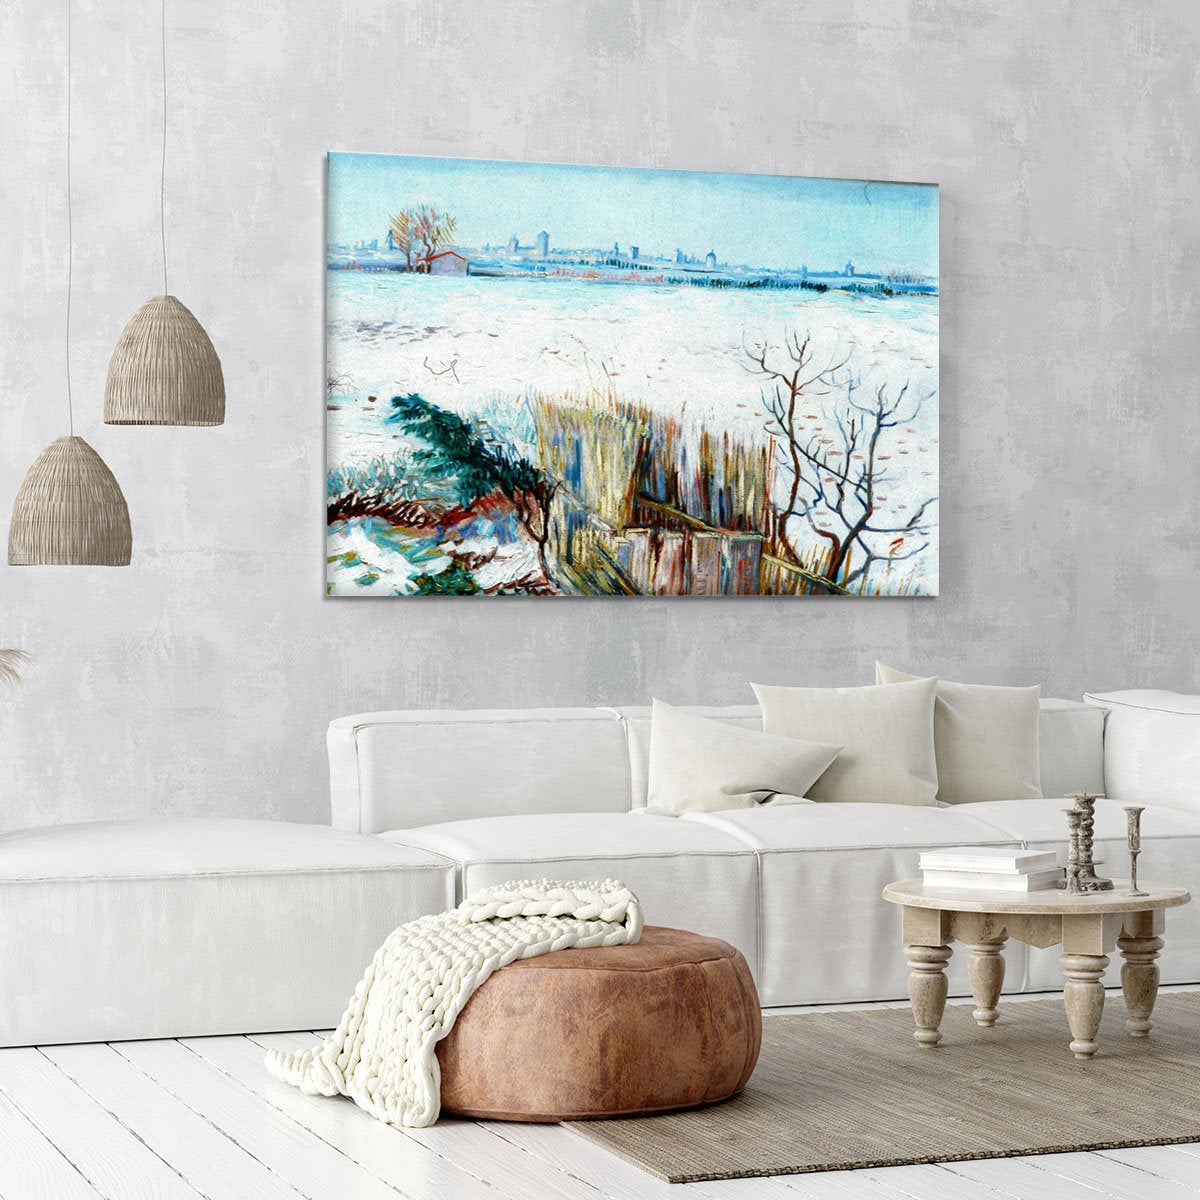 Snowy Landscape with Arles in the Background by Van Gogh Canvas Print or Poster